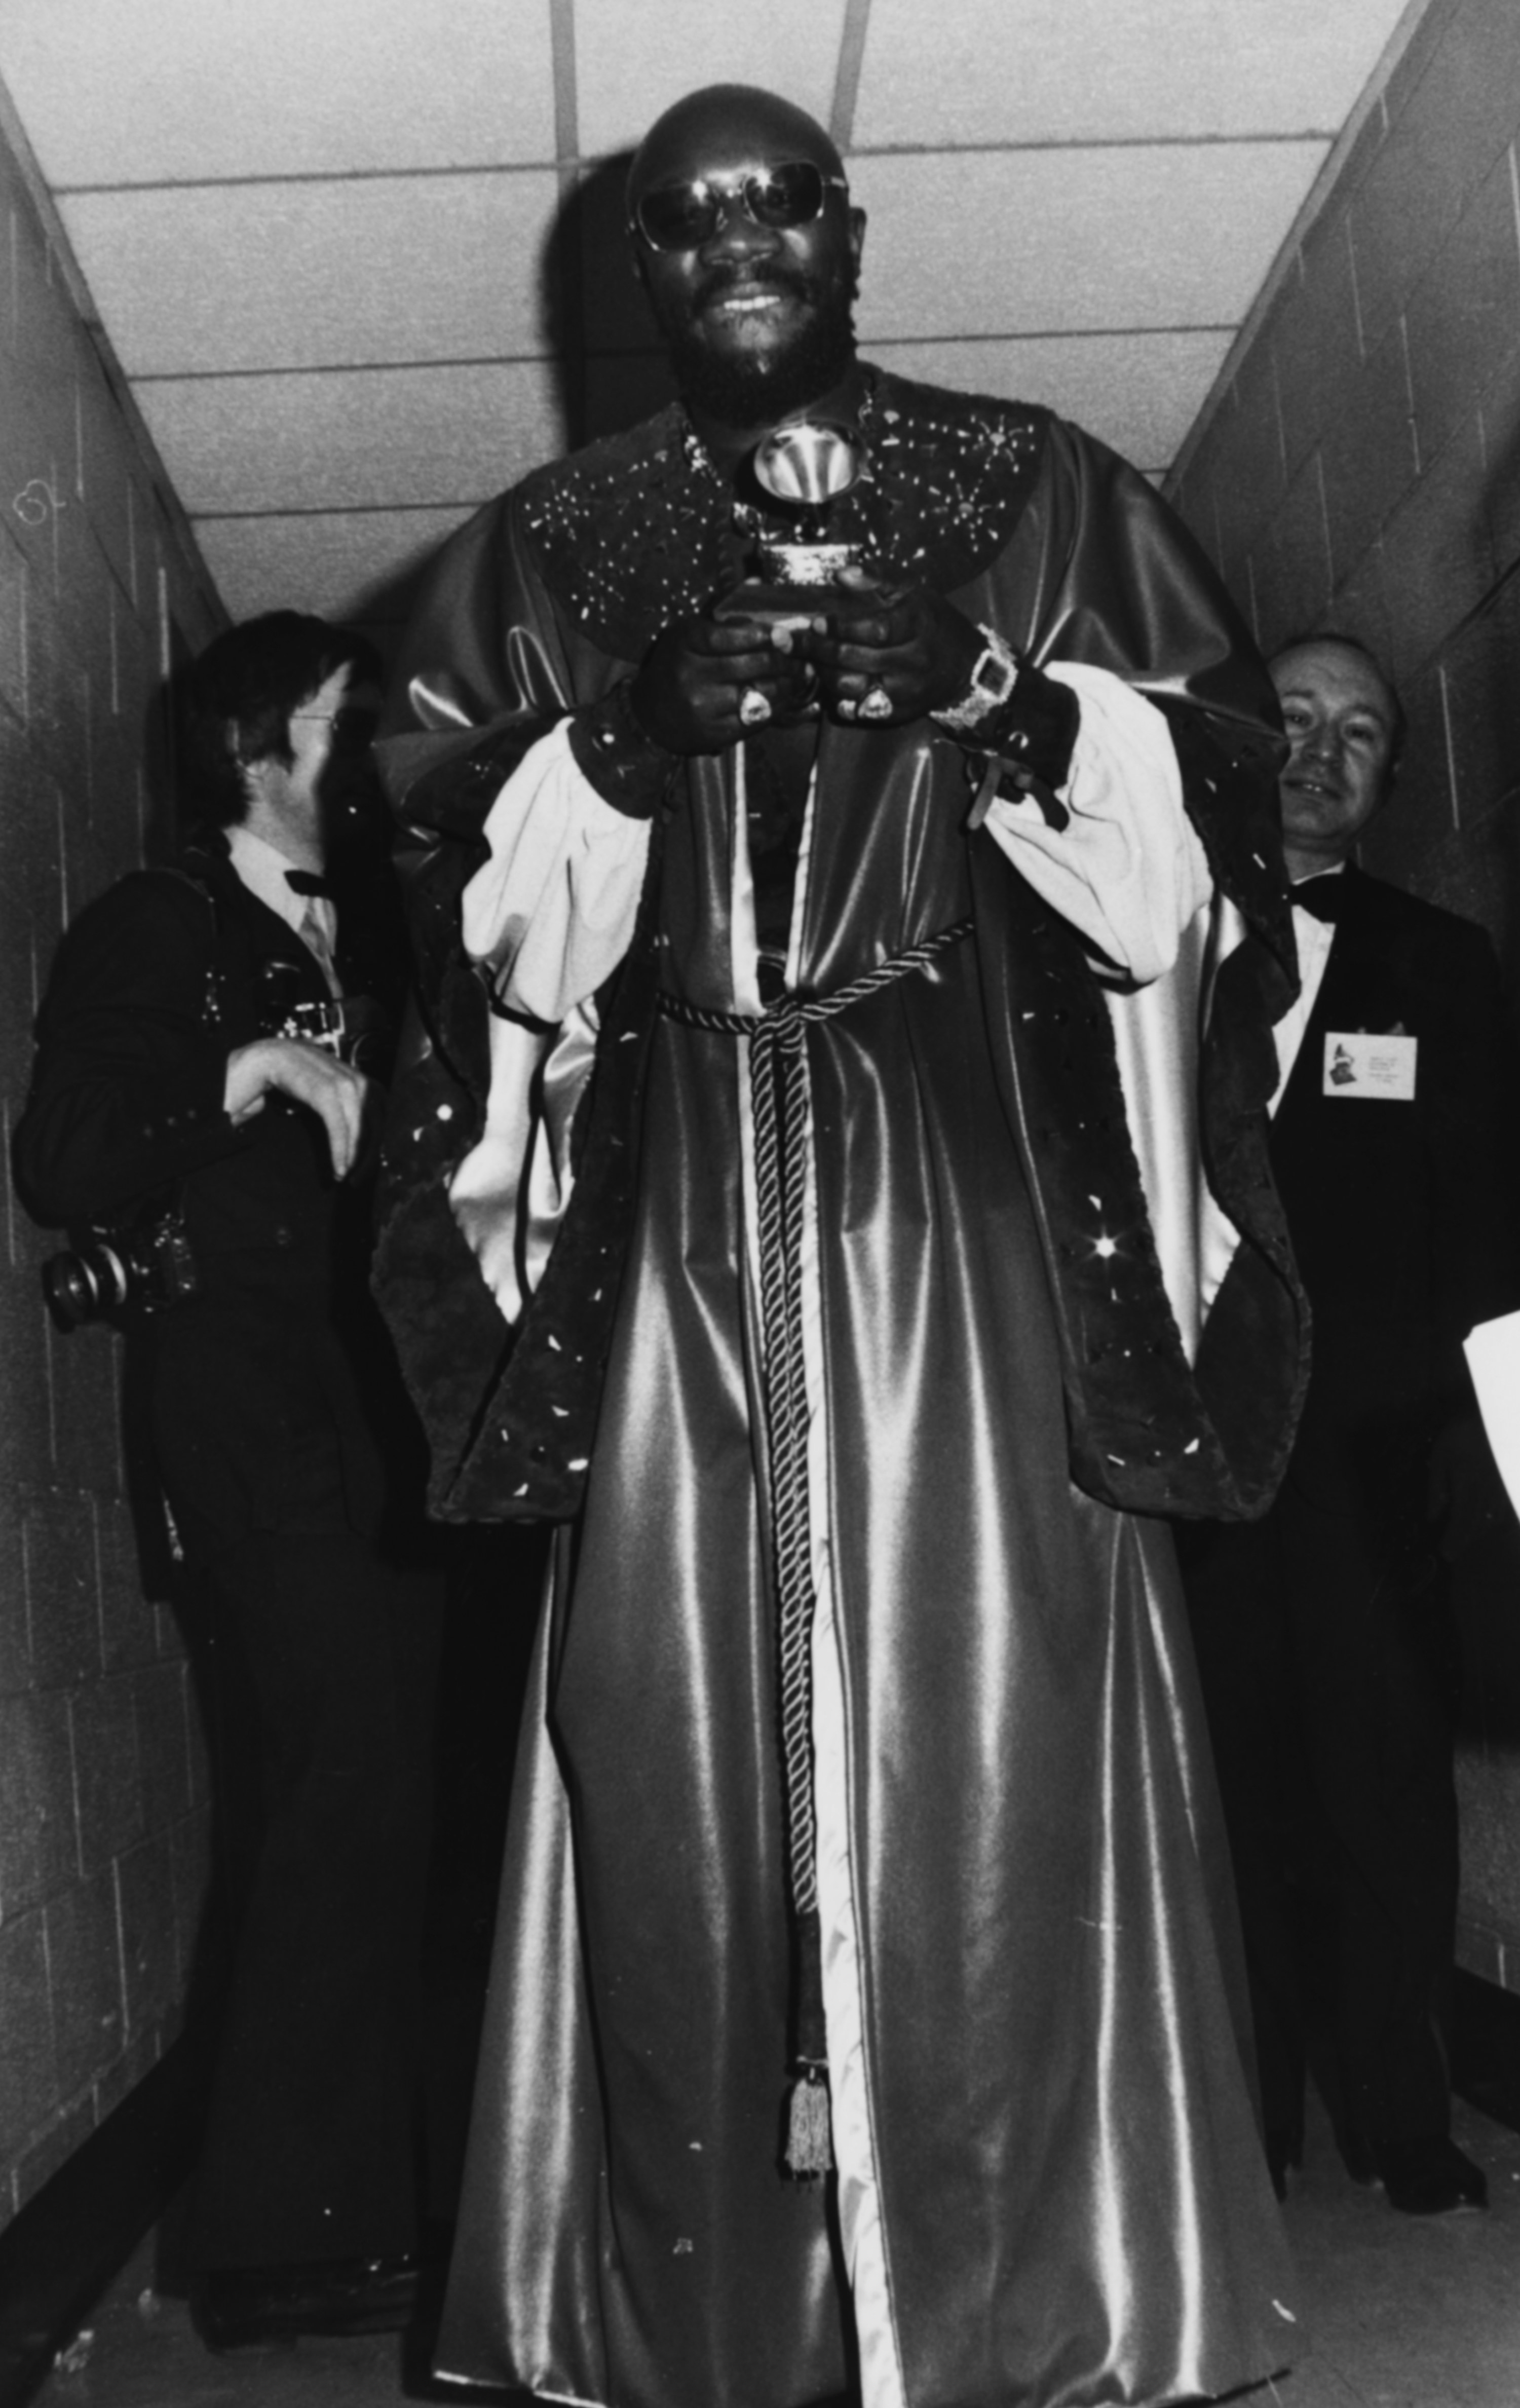 Actor and singer Isaac Hayes wearing a long robe and holding his Grammy in 1972